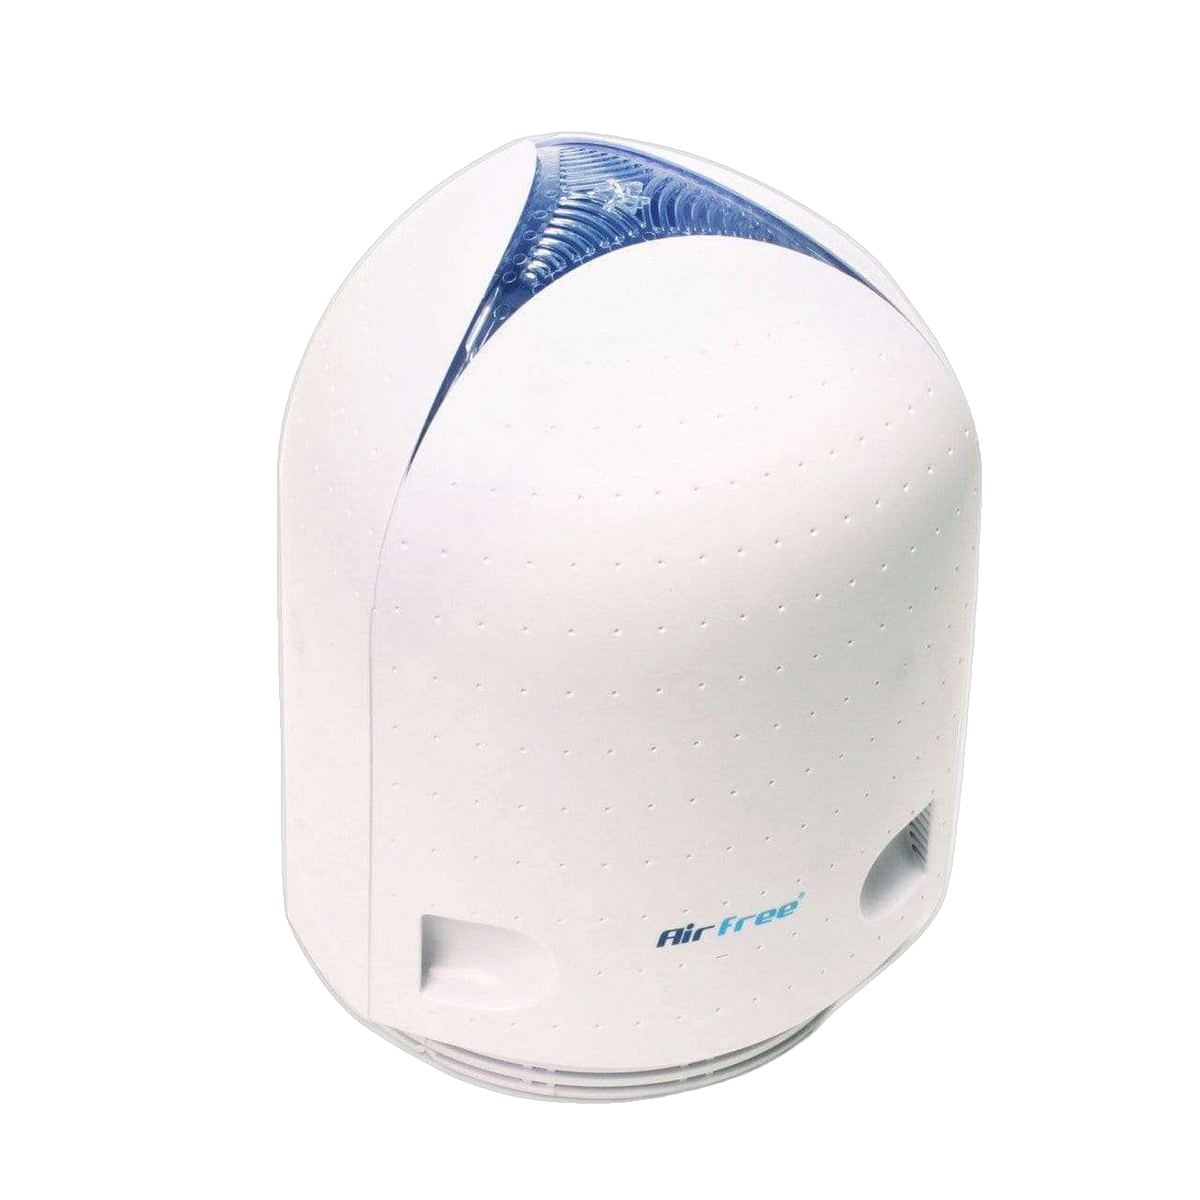 Airfree P1000 Air Sterilizer and Purifier - FactoryPure - 1